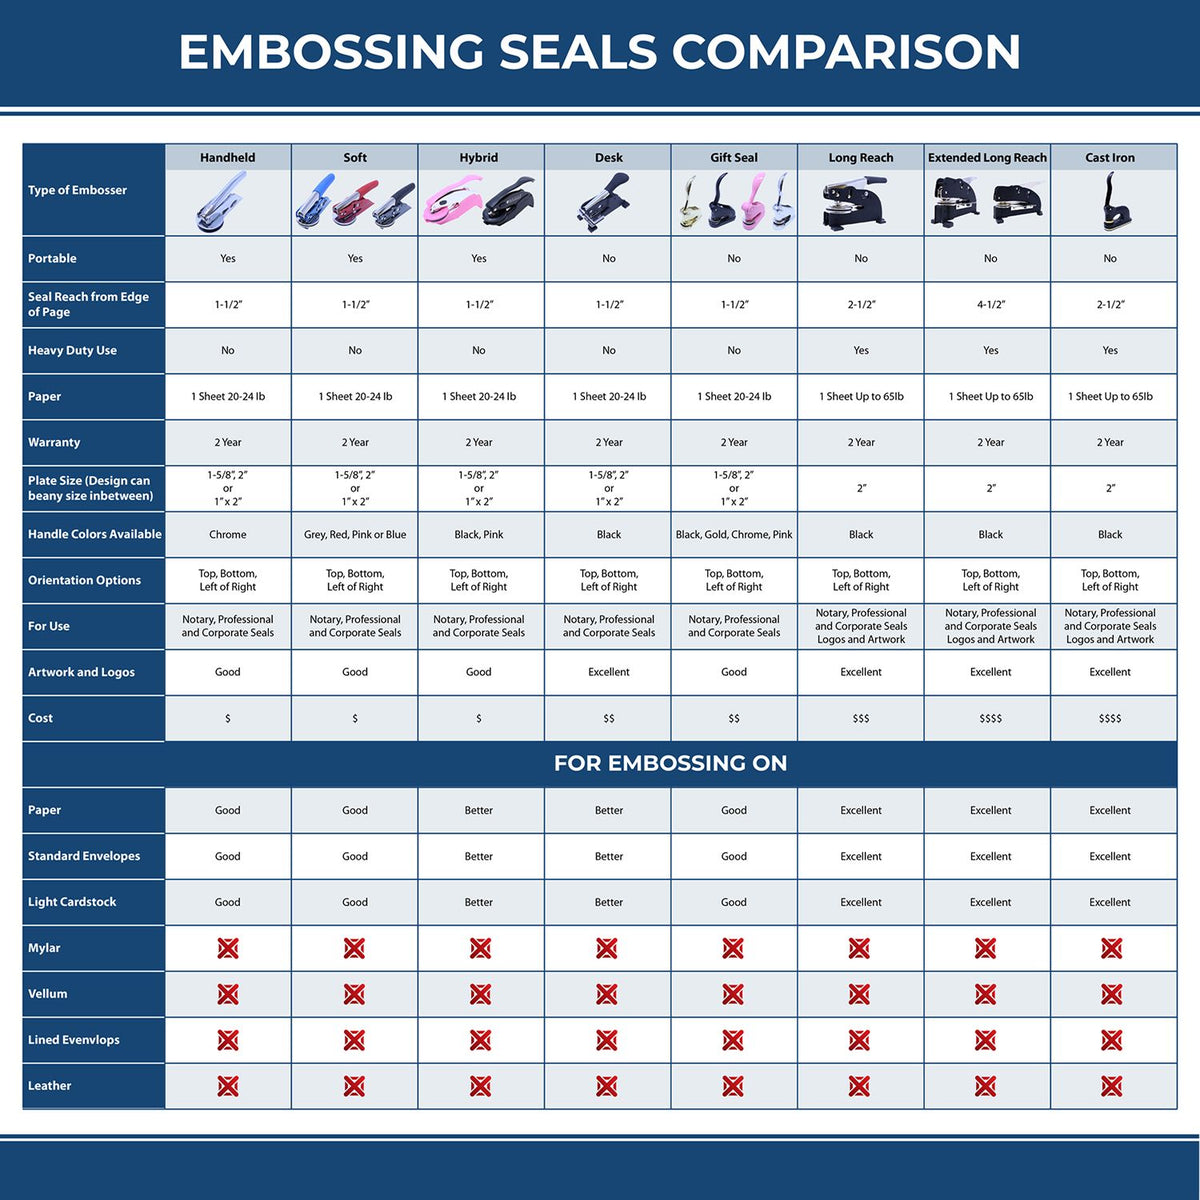 A comparison chart for the different types of mount models available for the Handheld Nebraska Land Surveyor Seal.